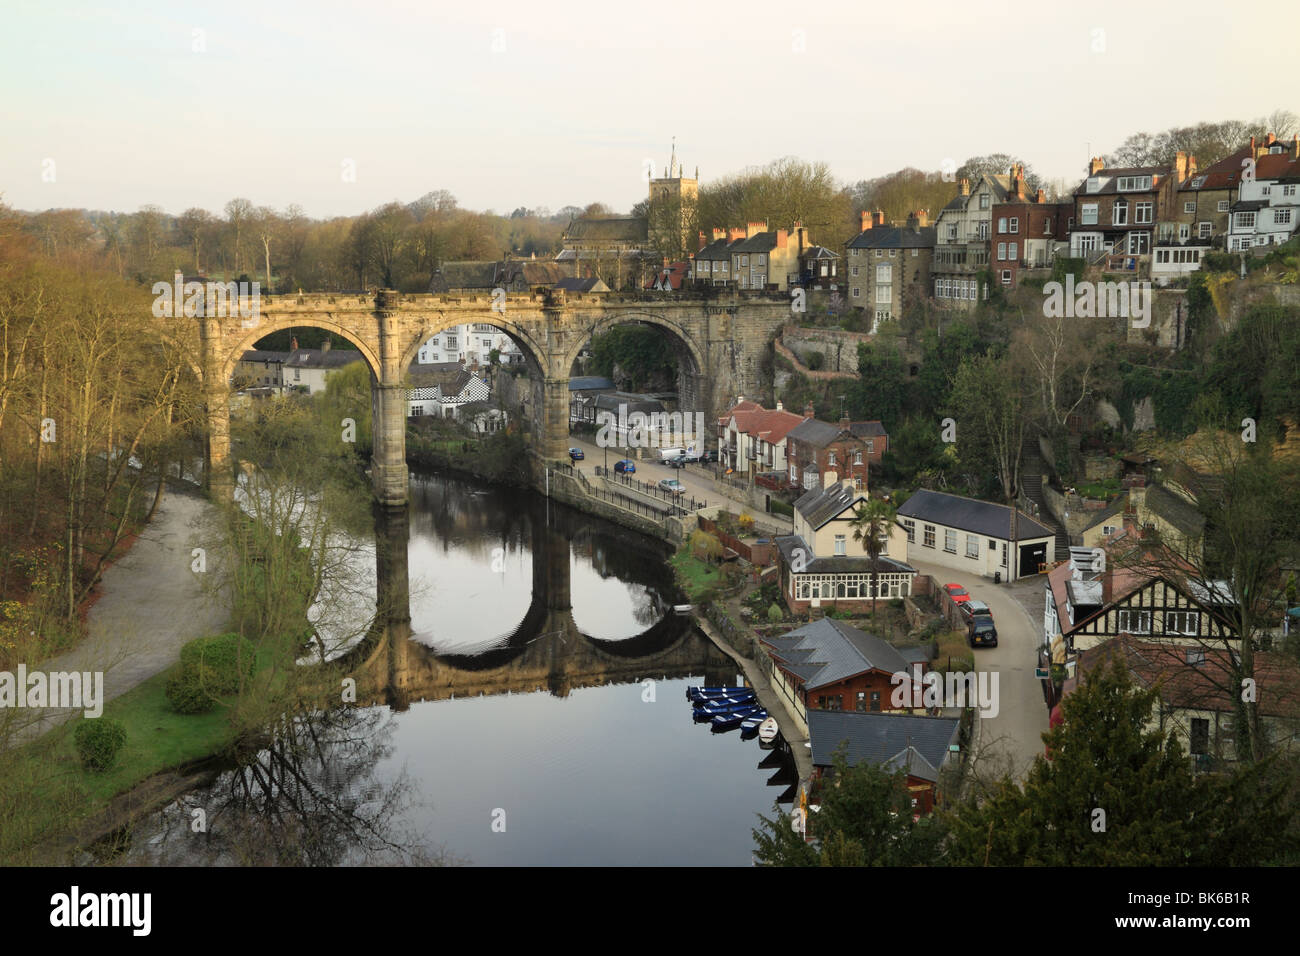 The railway viaduct over the river Nidd, at Knaresborough in North Yorkshire, England Stock Photo